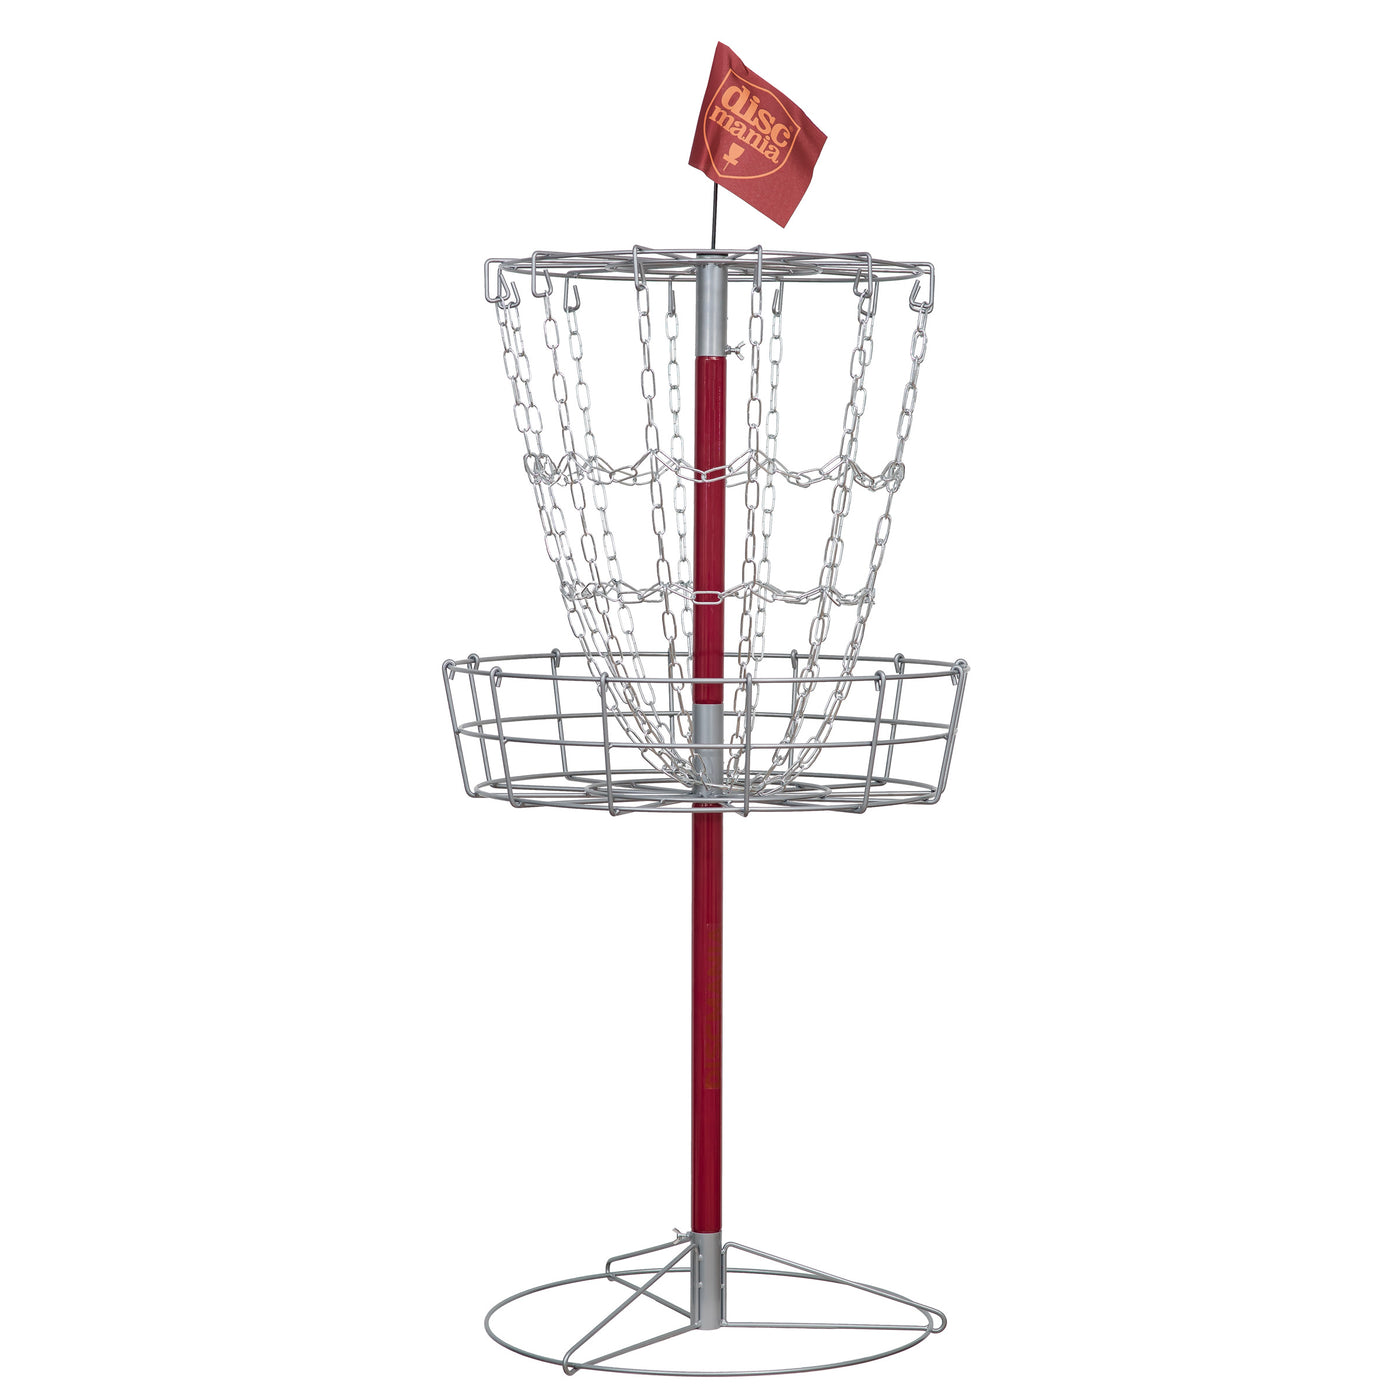 All in one disc golf set